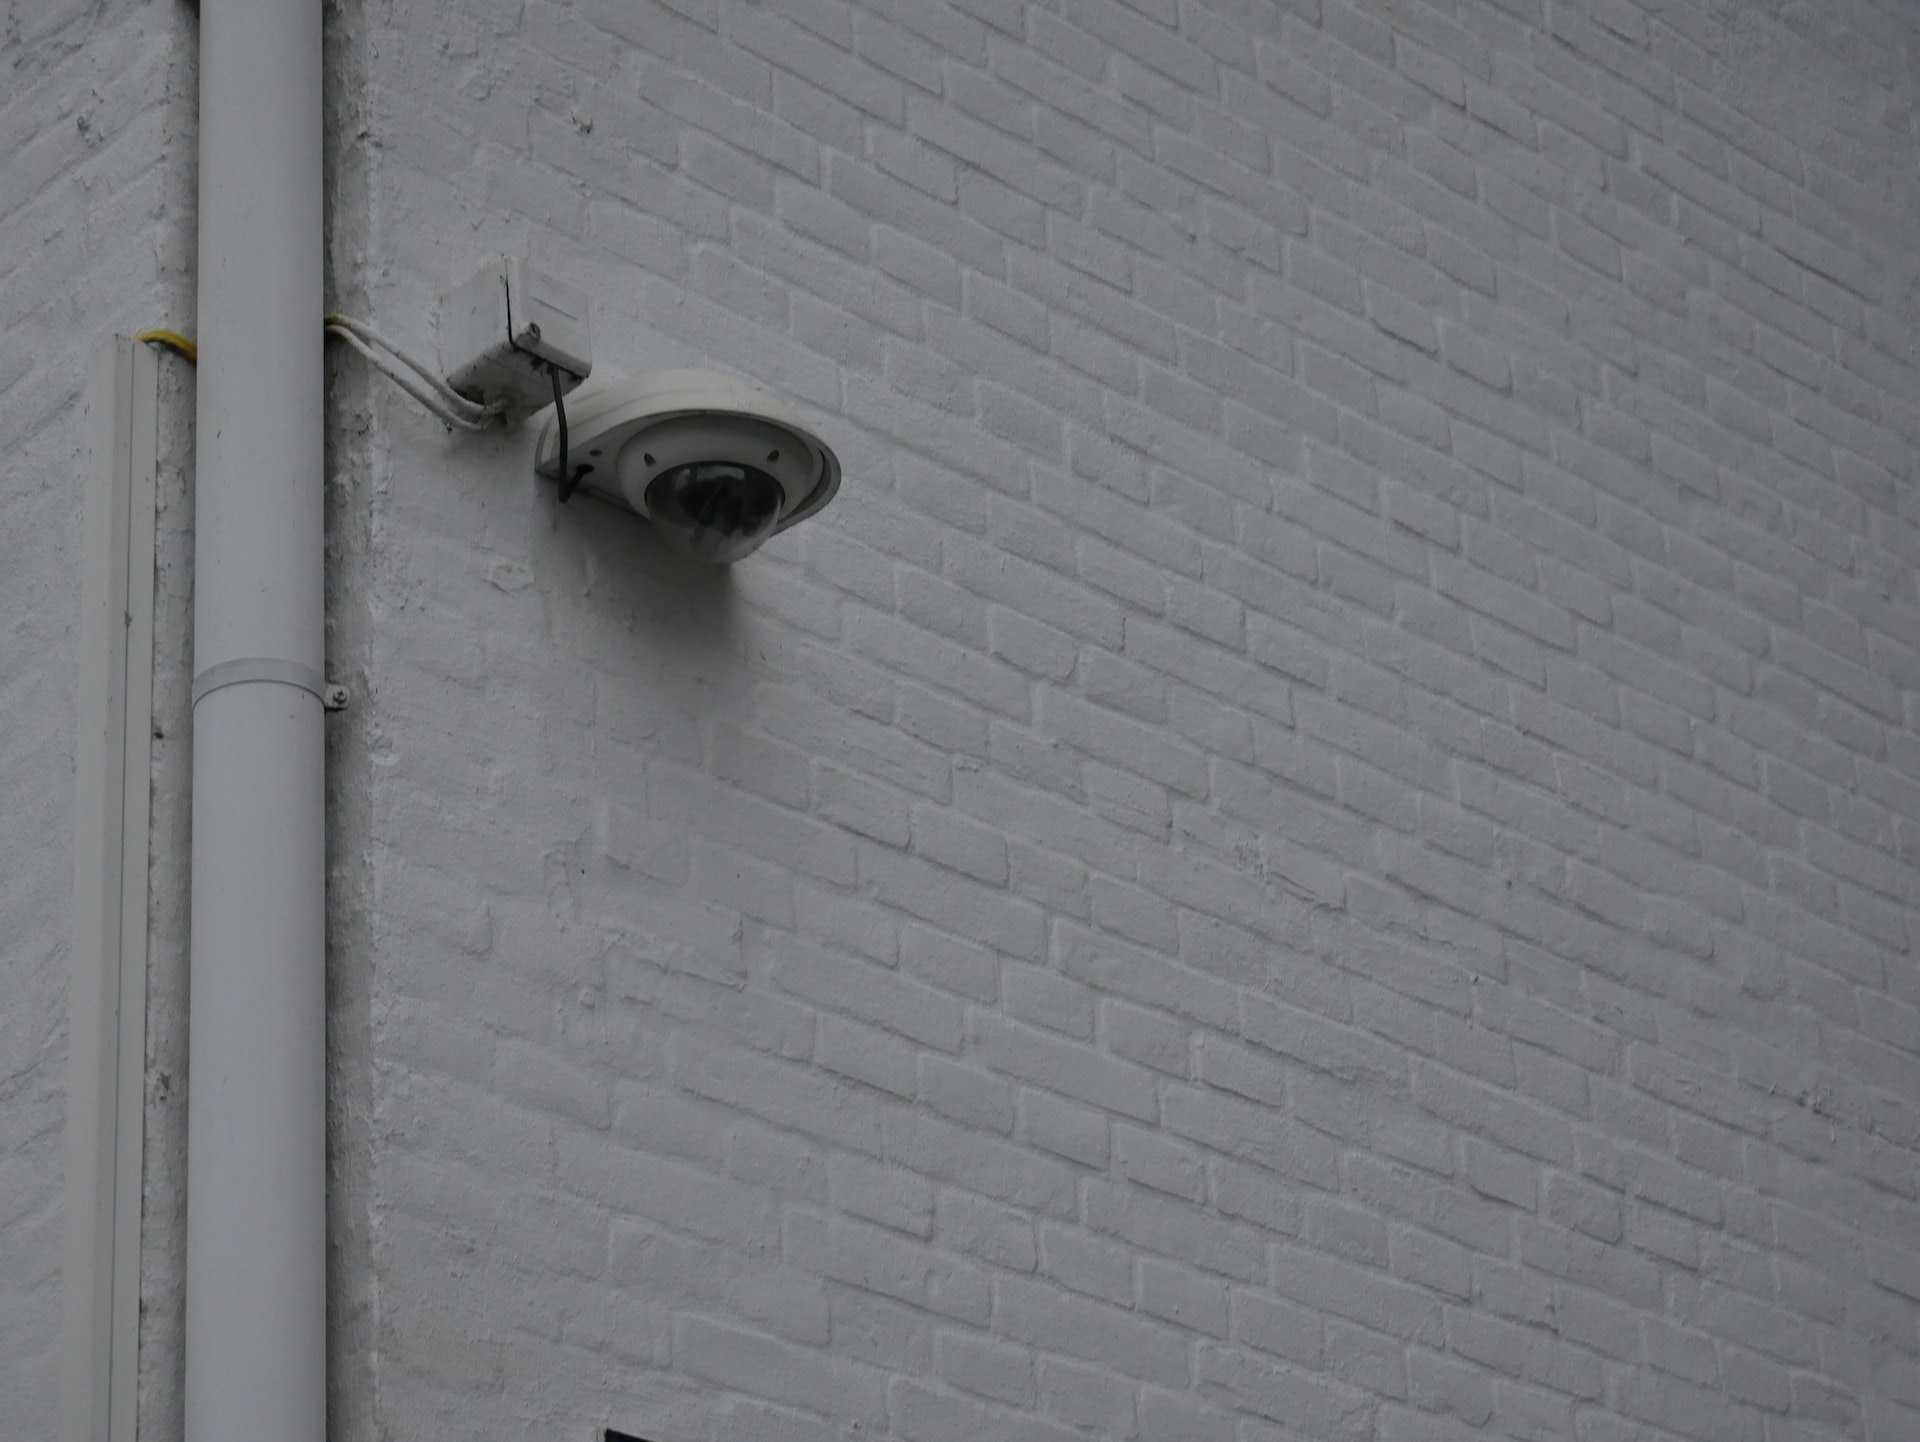 How to Buy the Best Security Camera